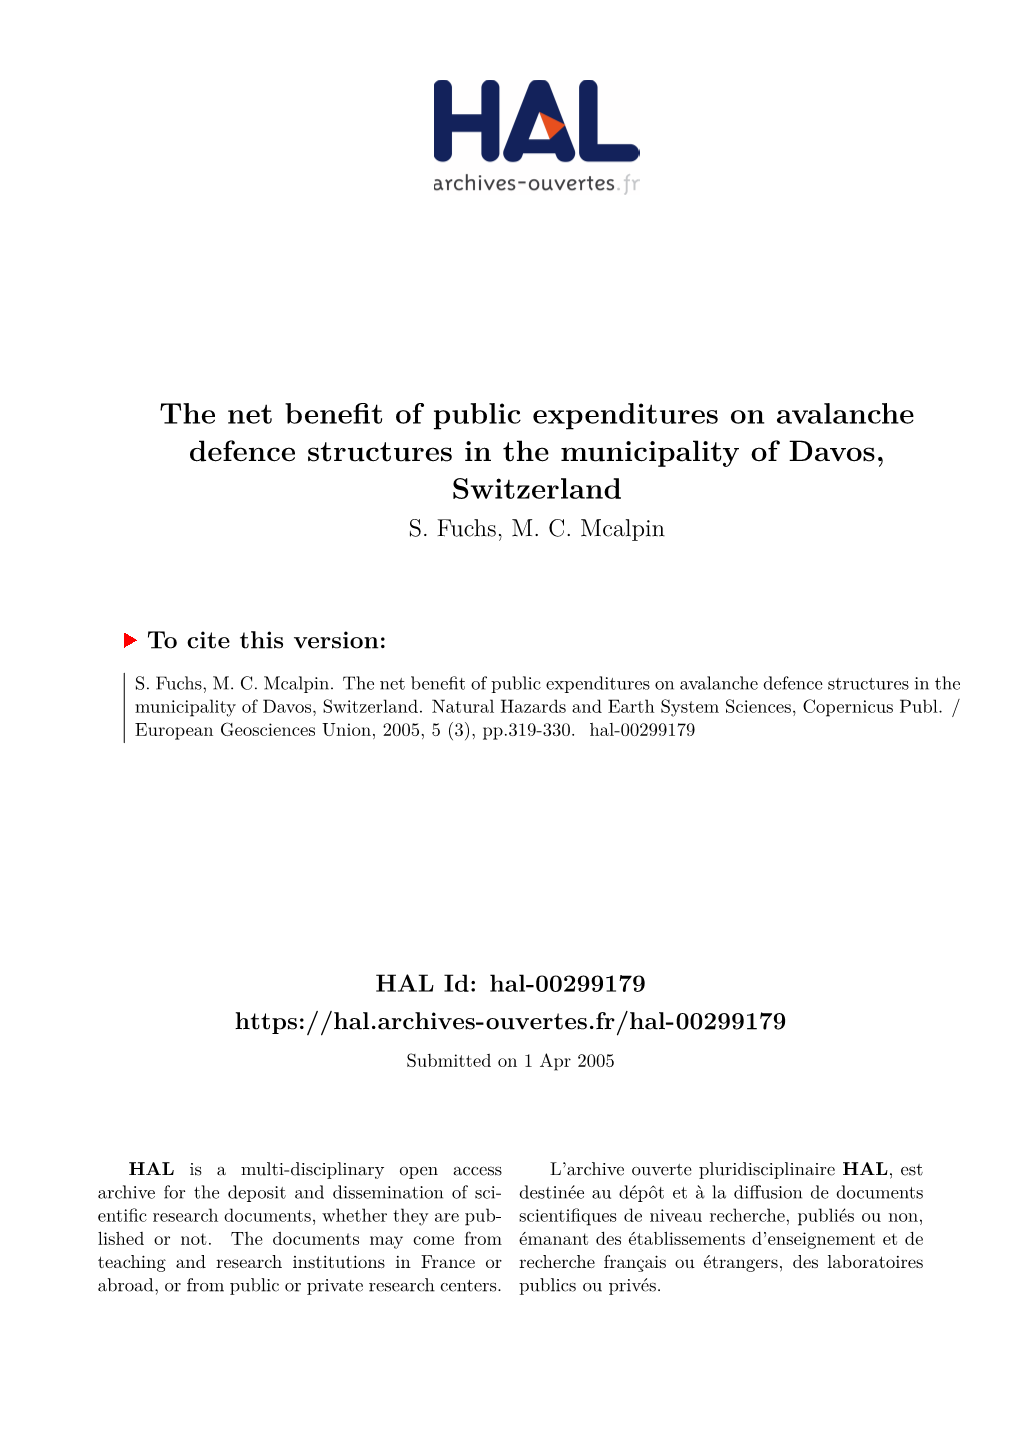 The Net Benefit of Public Expenditures on Avalanche Defence Structures in the Municipality of Davos, Switzerland S